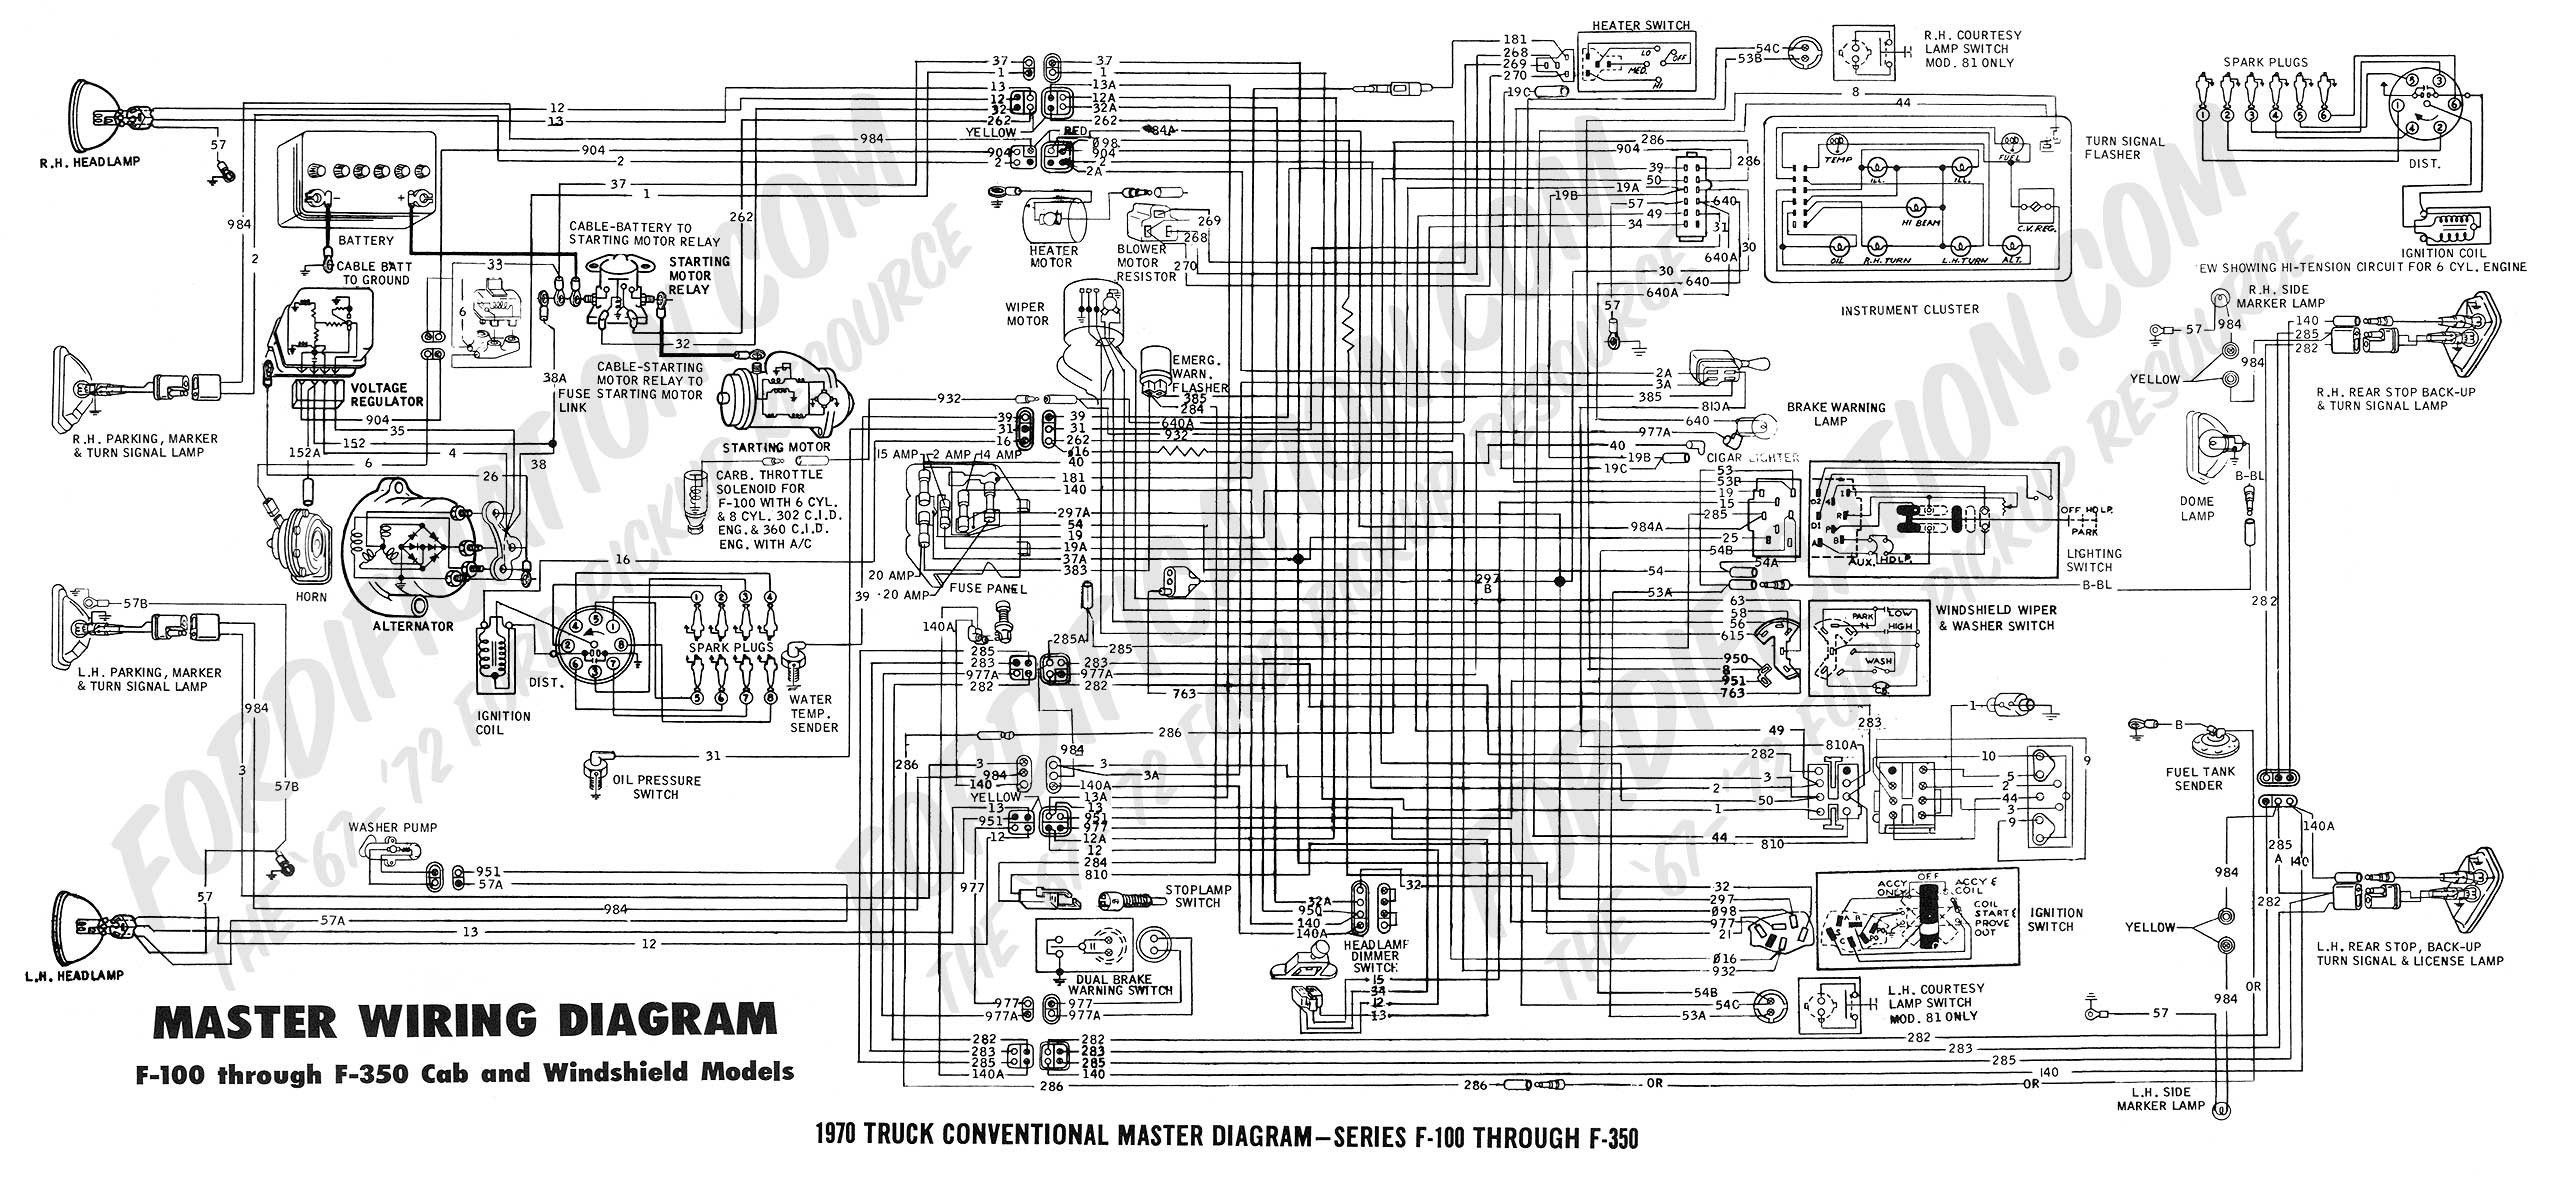 86 Chevy Truck Wiring Diagram ford Truck Technical Drawings and Schematics Section H Wiring Of 86 Chevy Truck Wiring Diagram